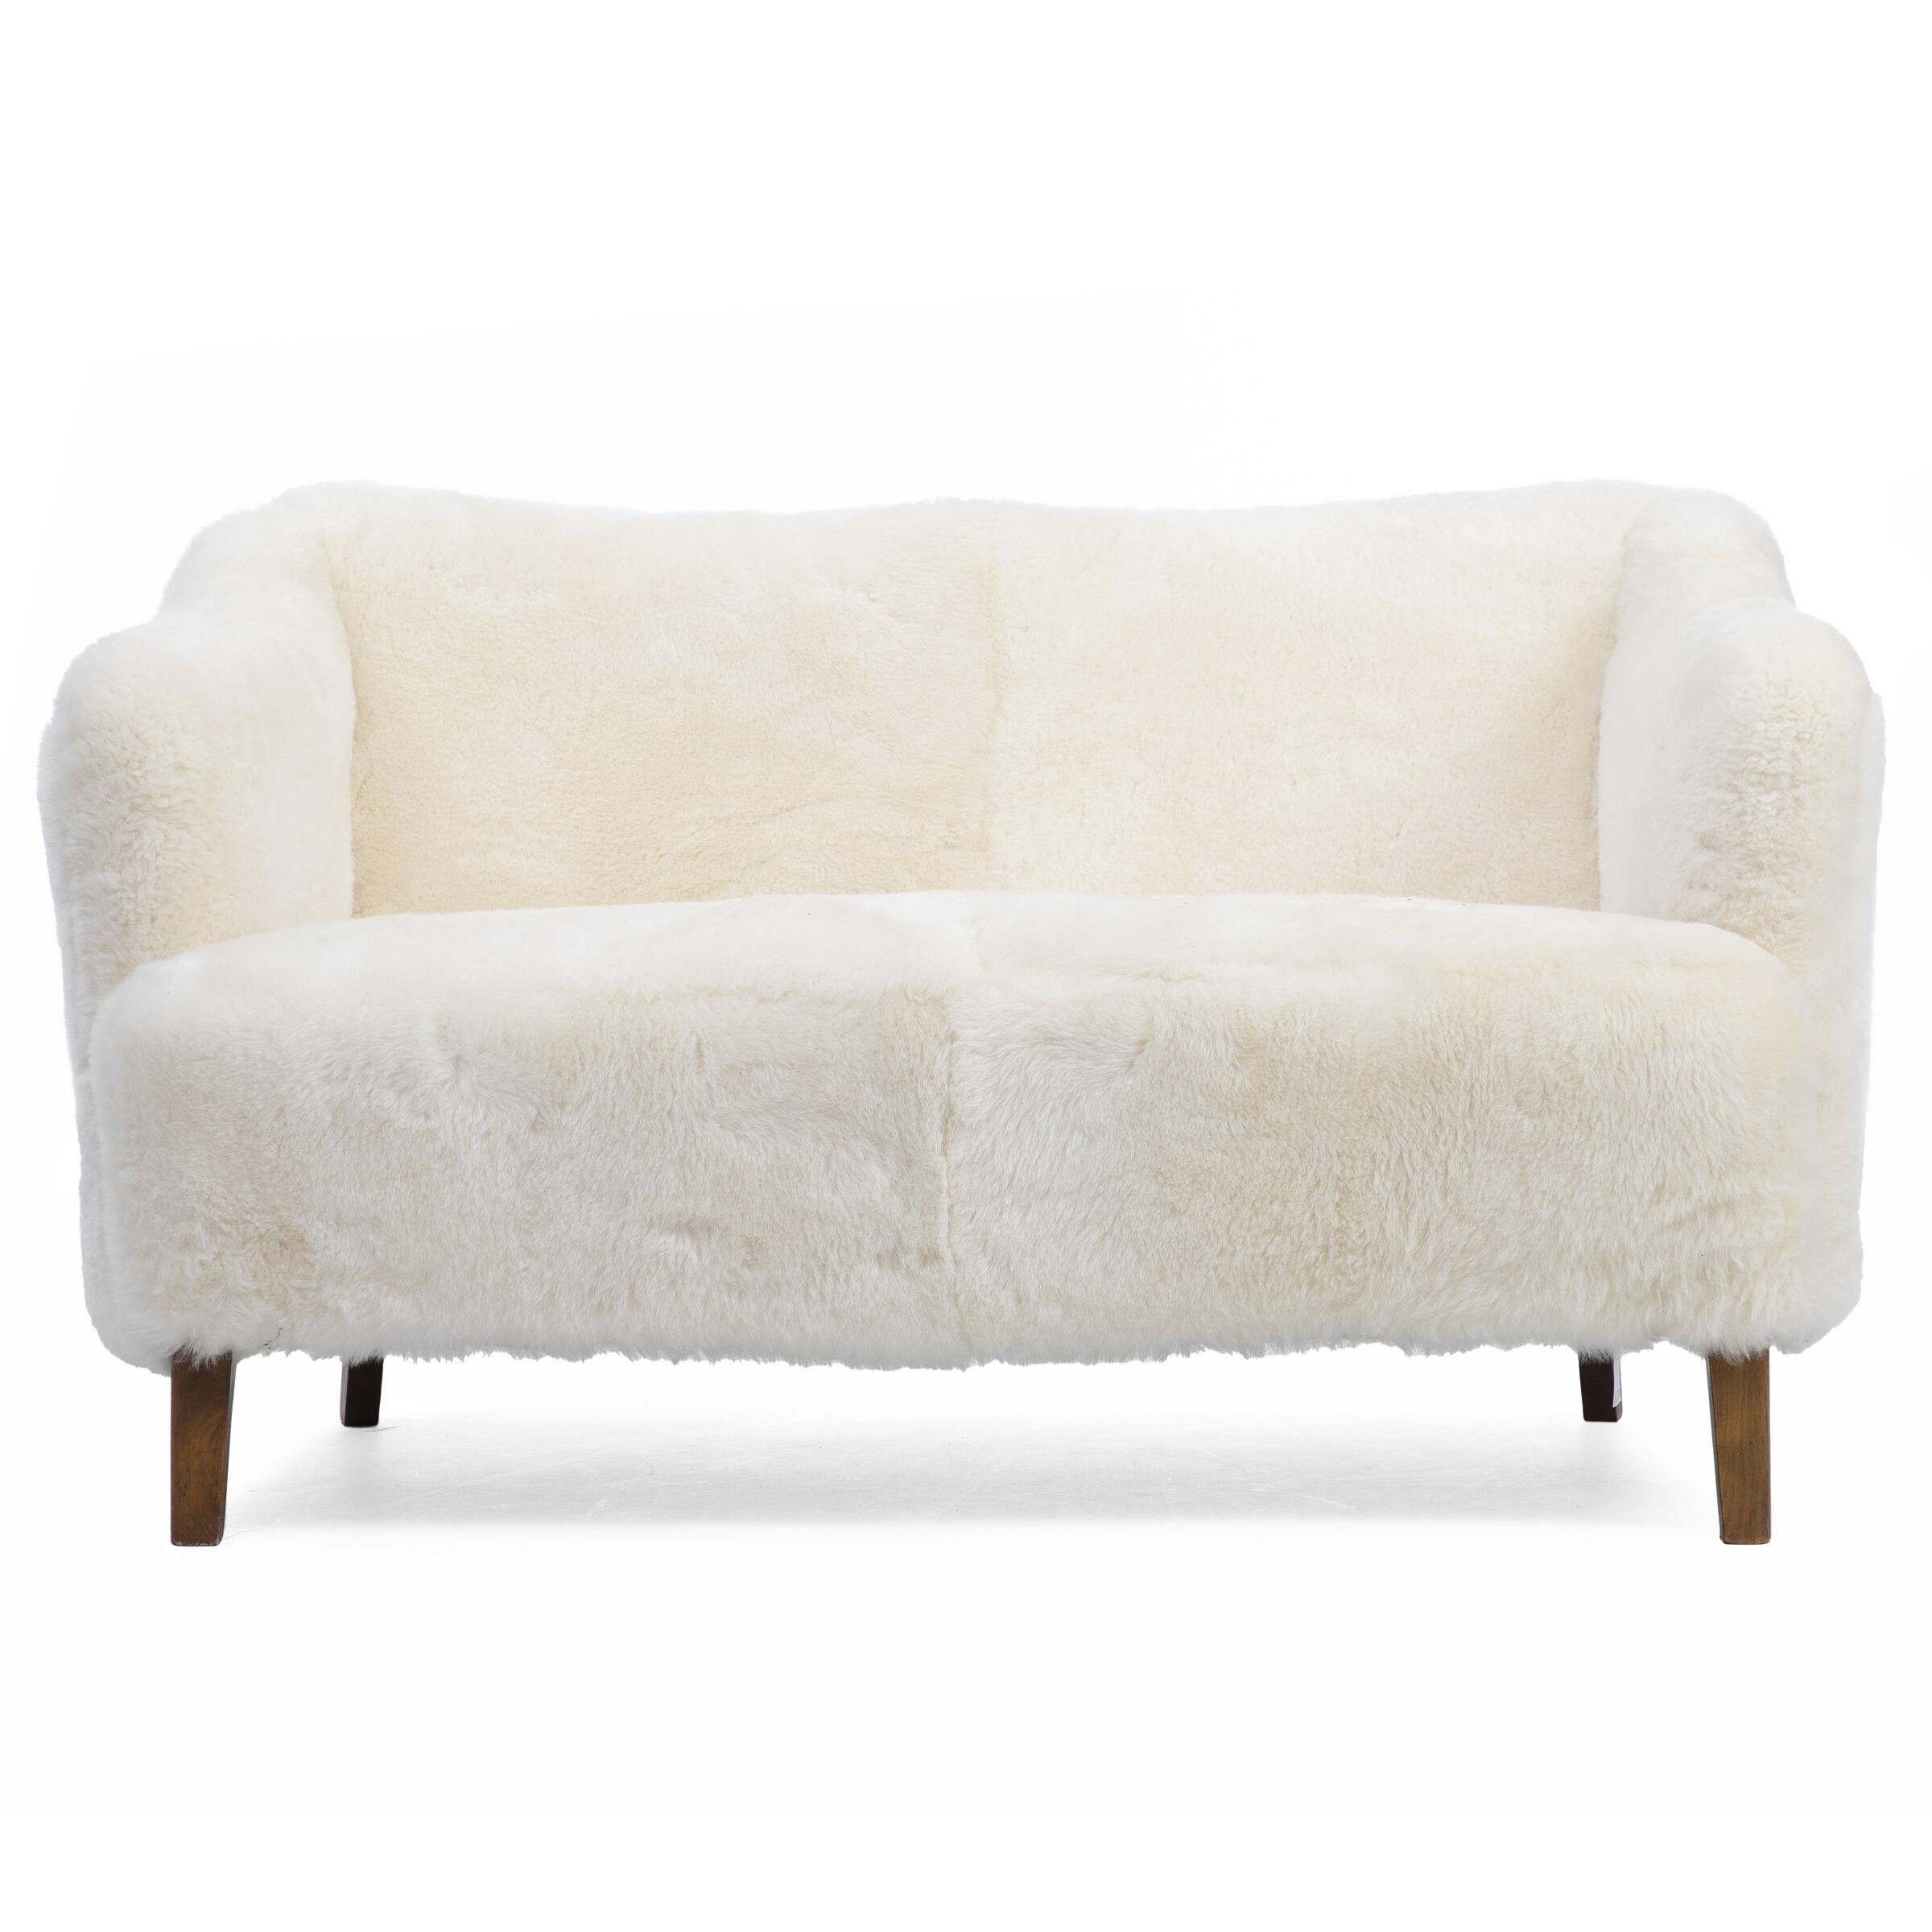 Two-seater sofa with stained beech legs. Upholstered with light and very soft lambswool. Designed 1930–1940s. 

Measures: H. 77 cm. W. 135 cm. D. 84 cm.